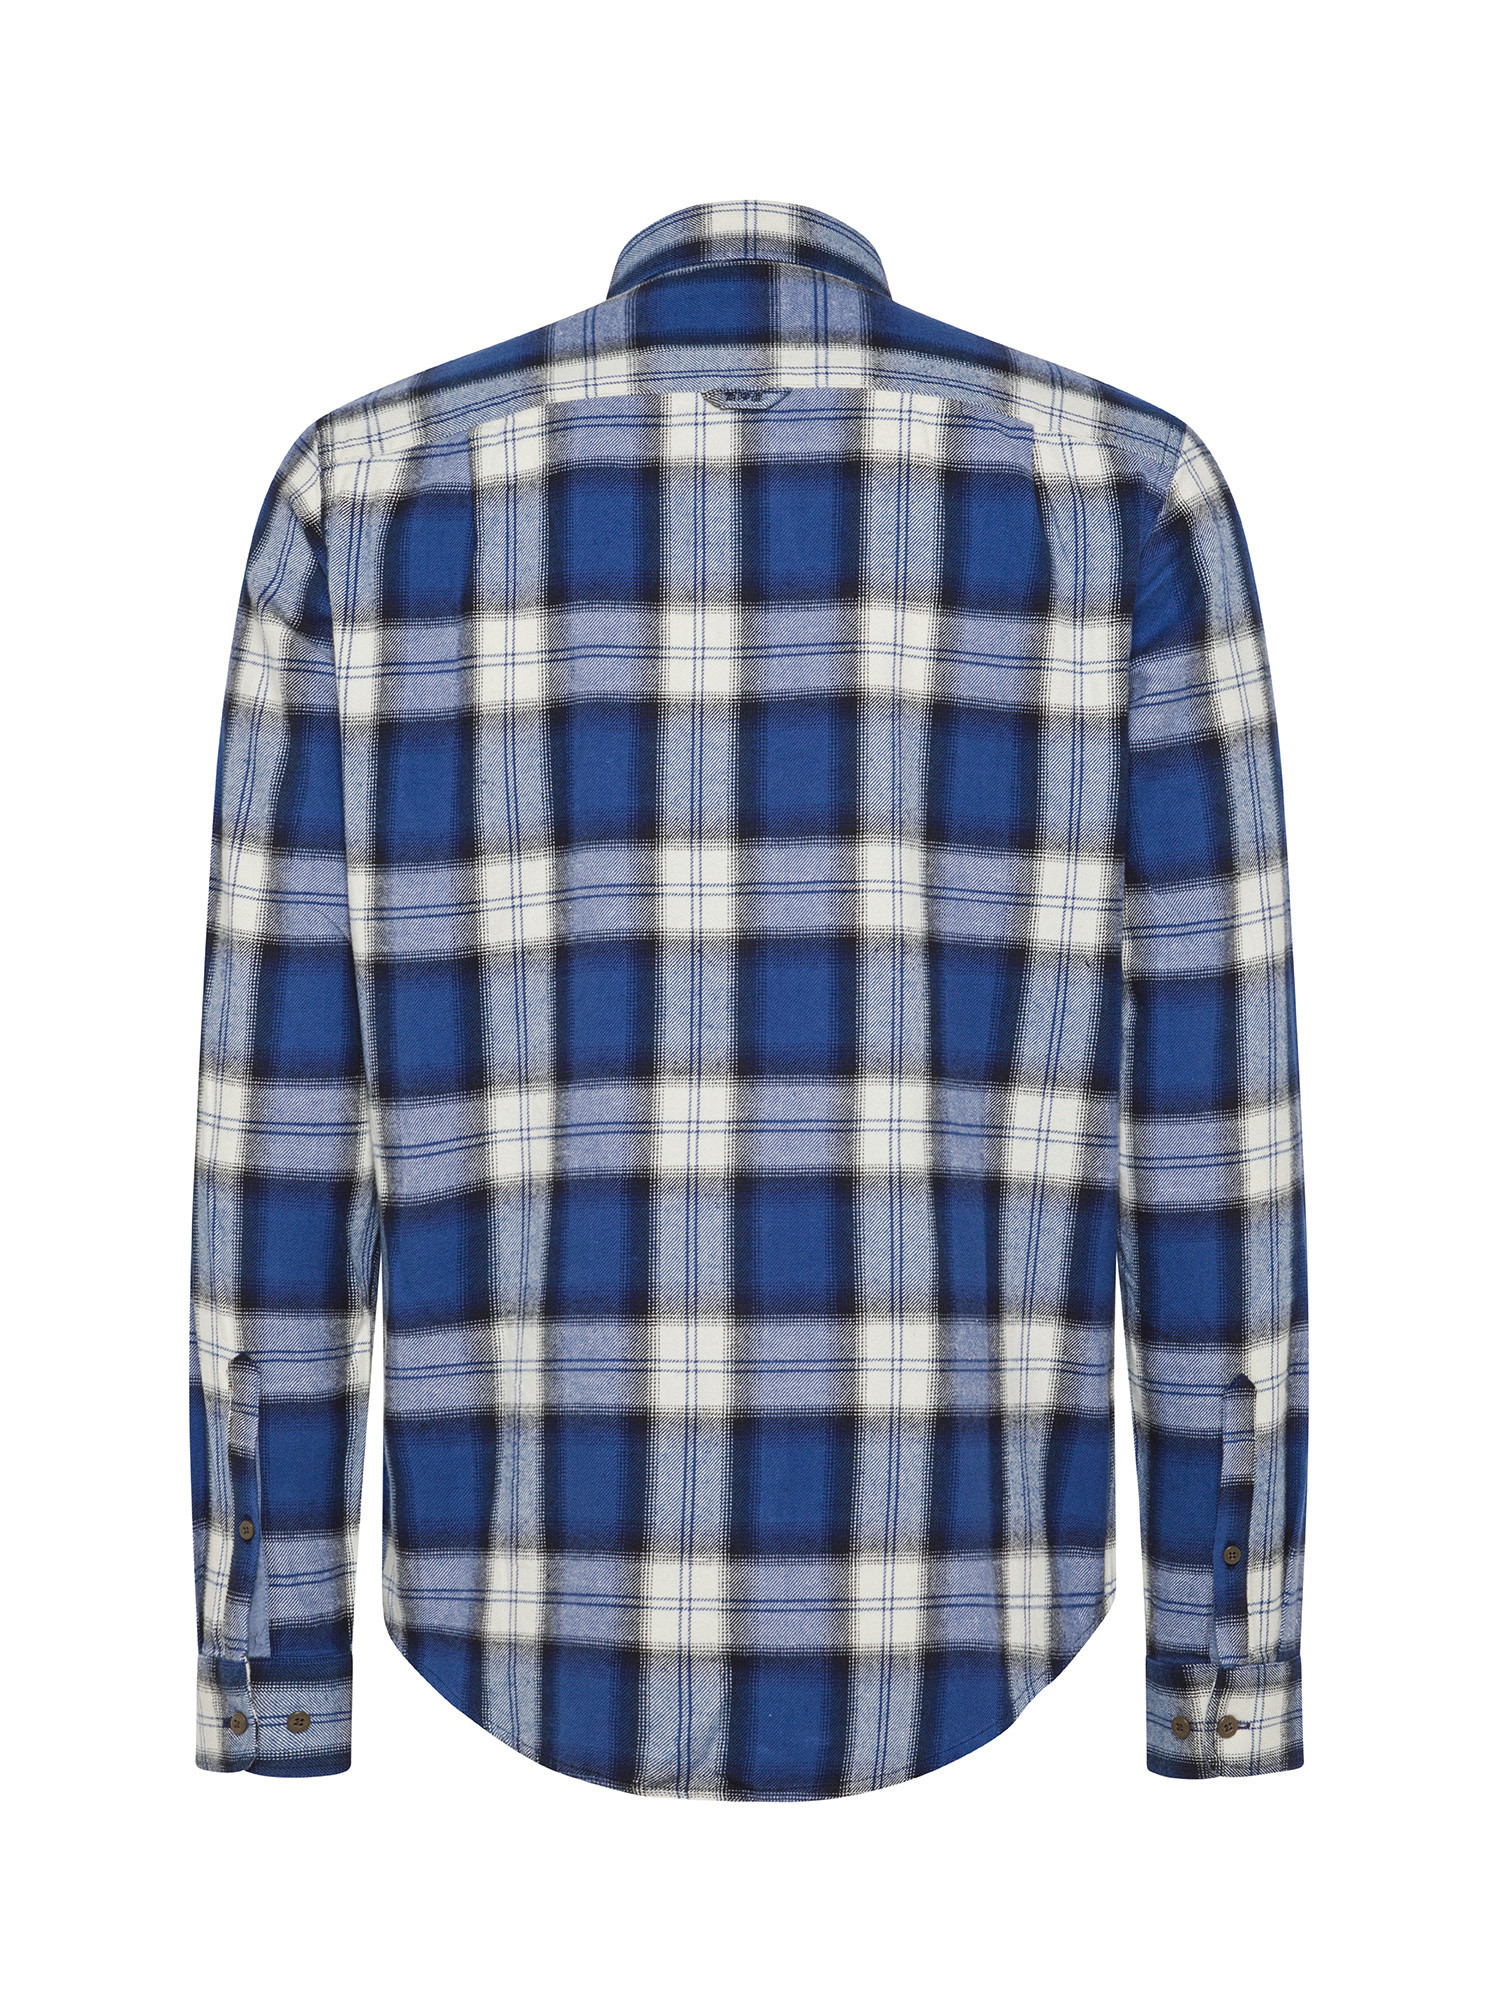 Superdry - Cotton checked shirt, Blue, large image number 1